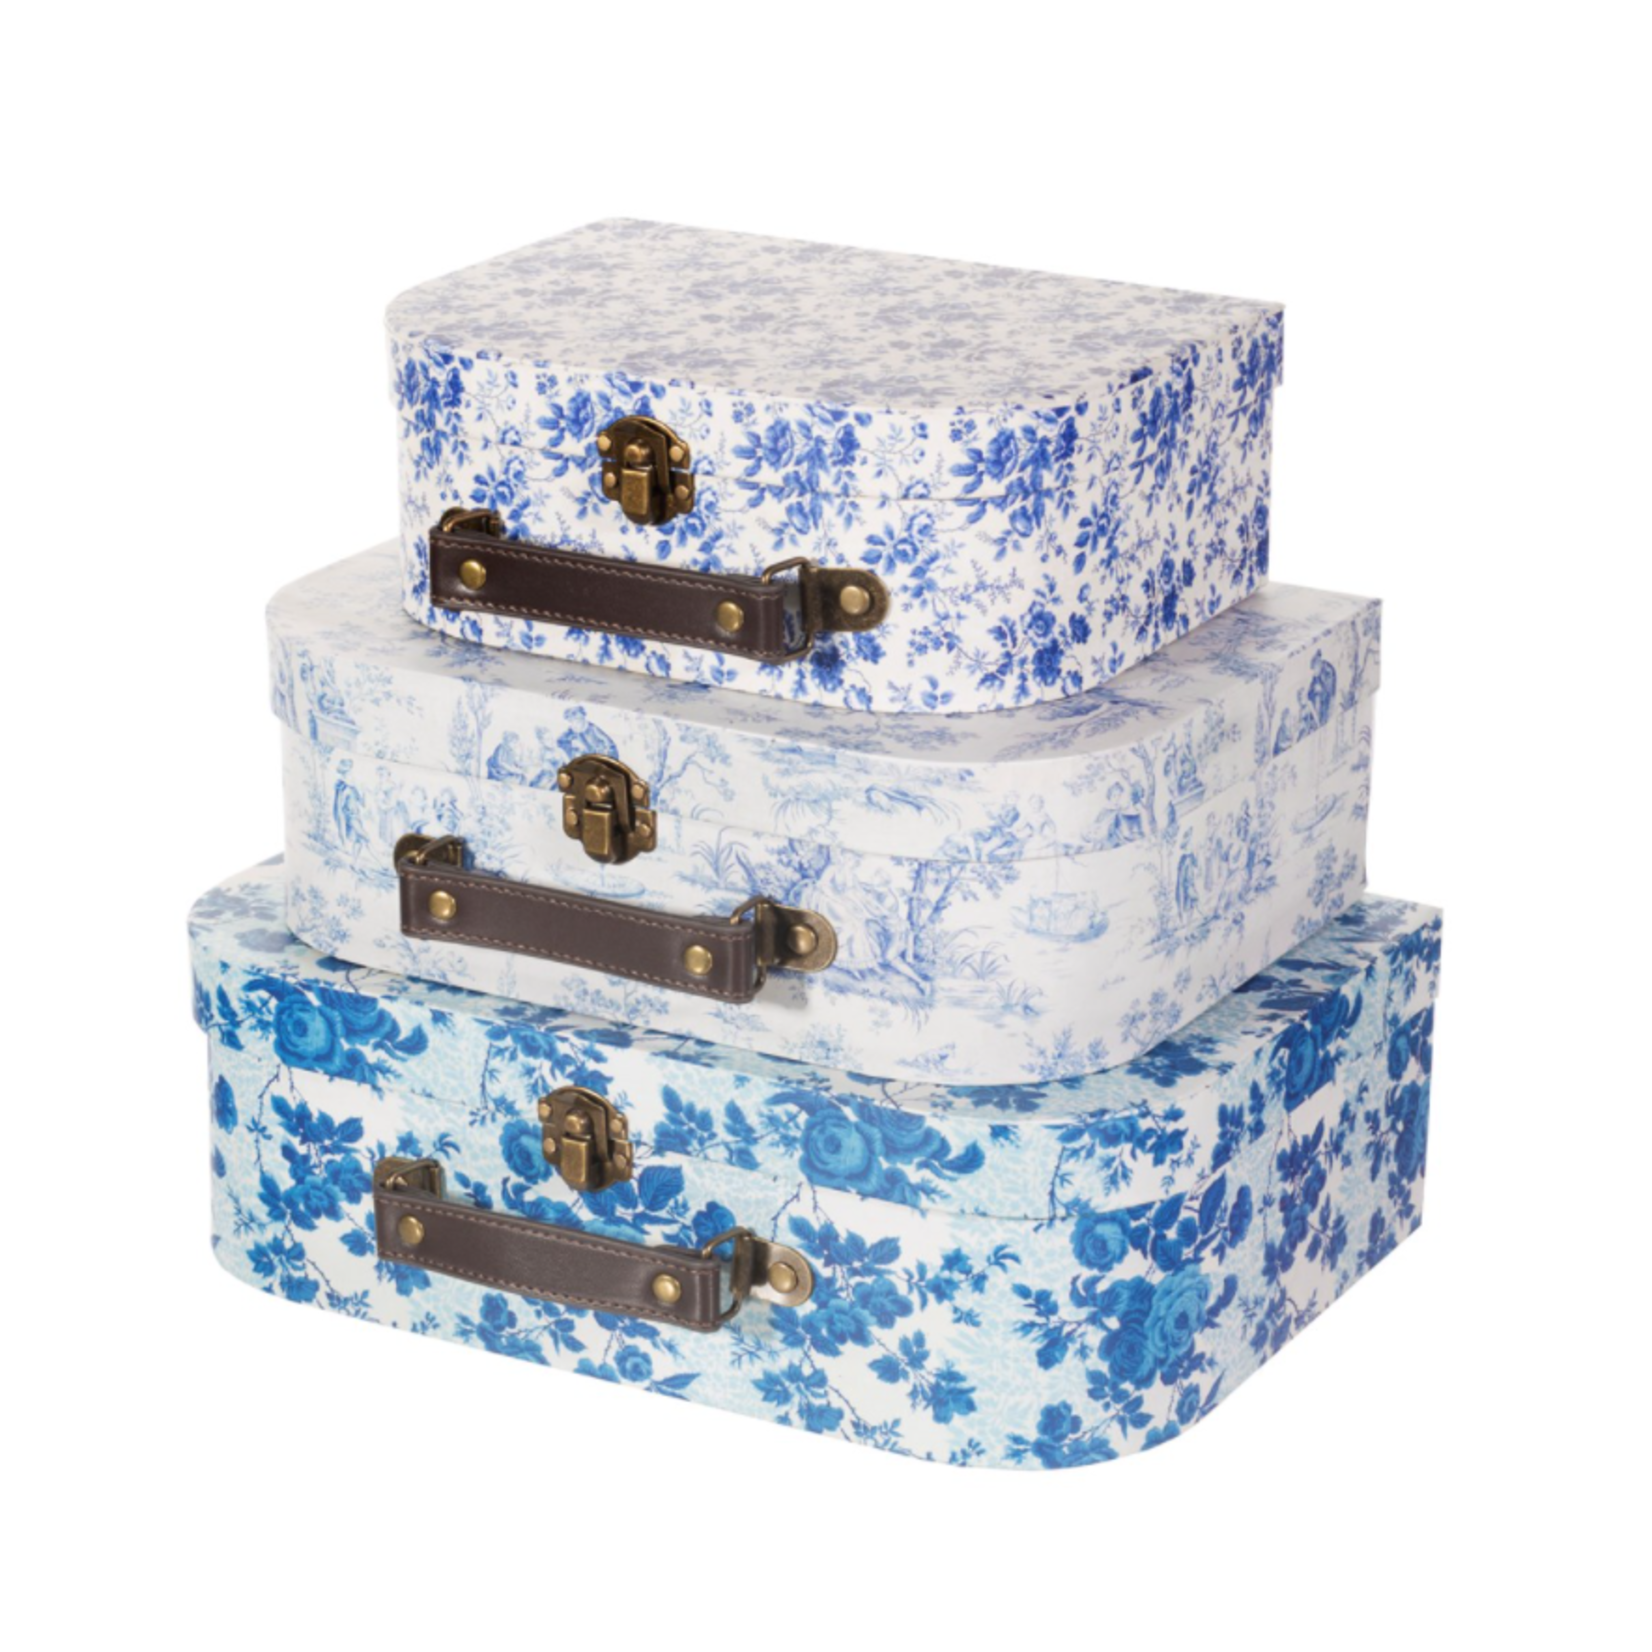 Sass and Belle .Celeste Blue and White Floral Suitcases